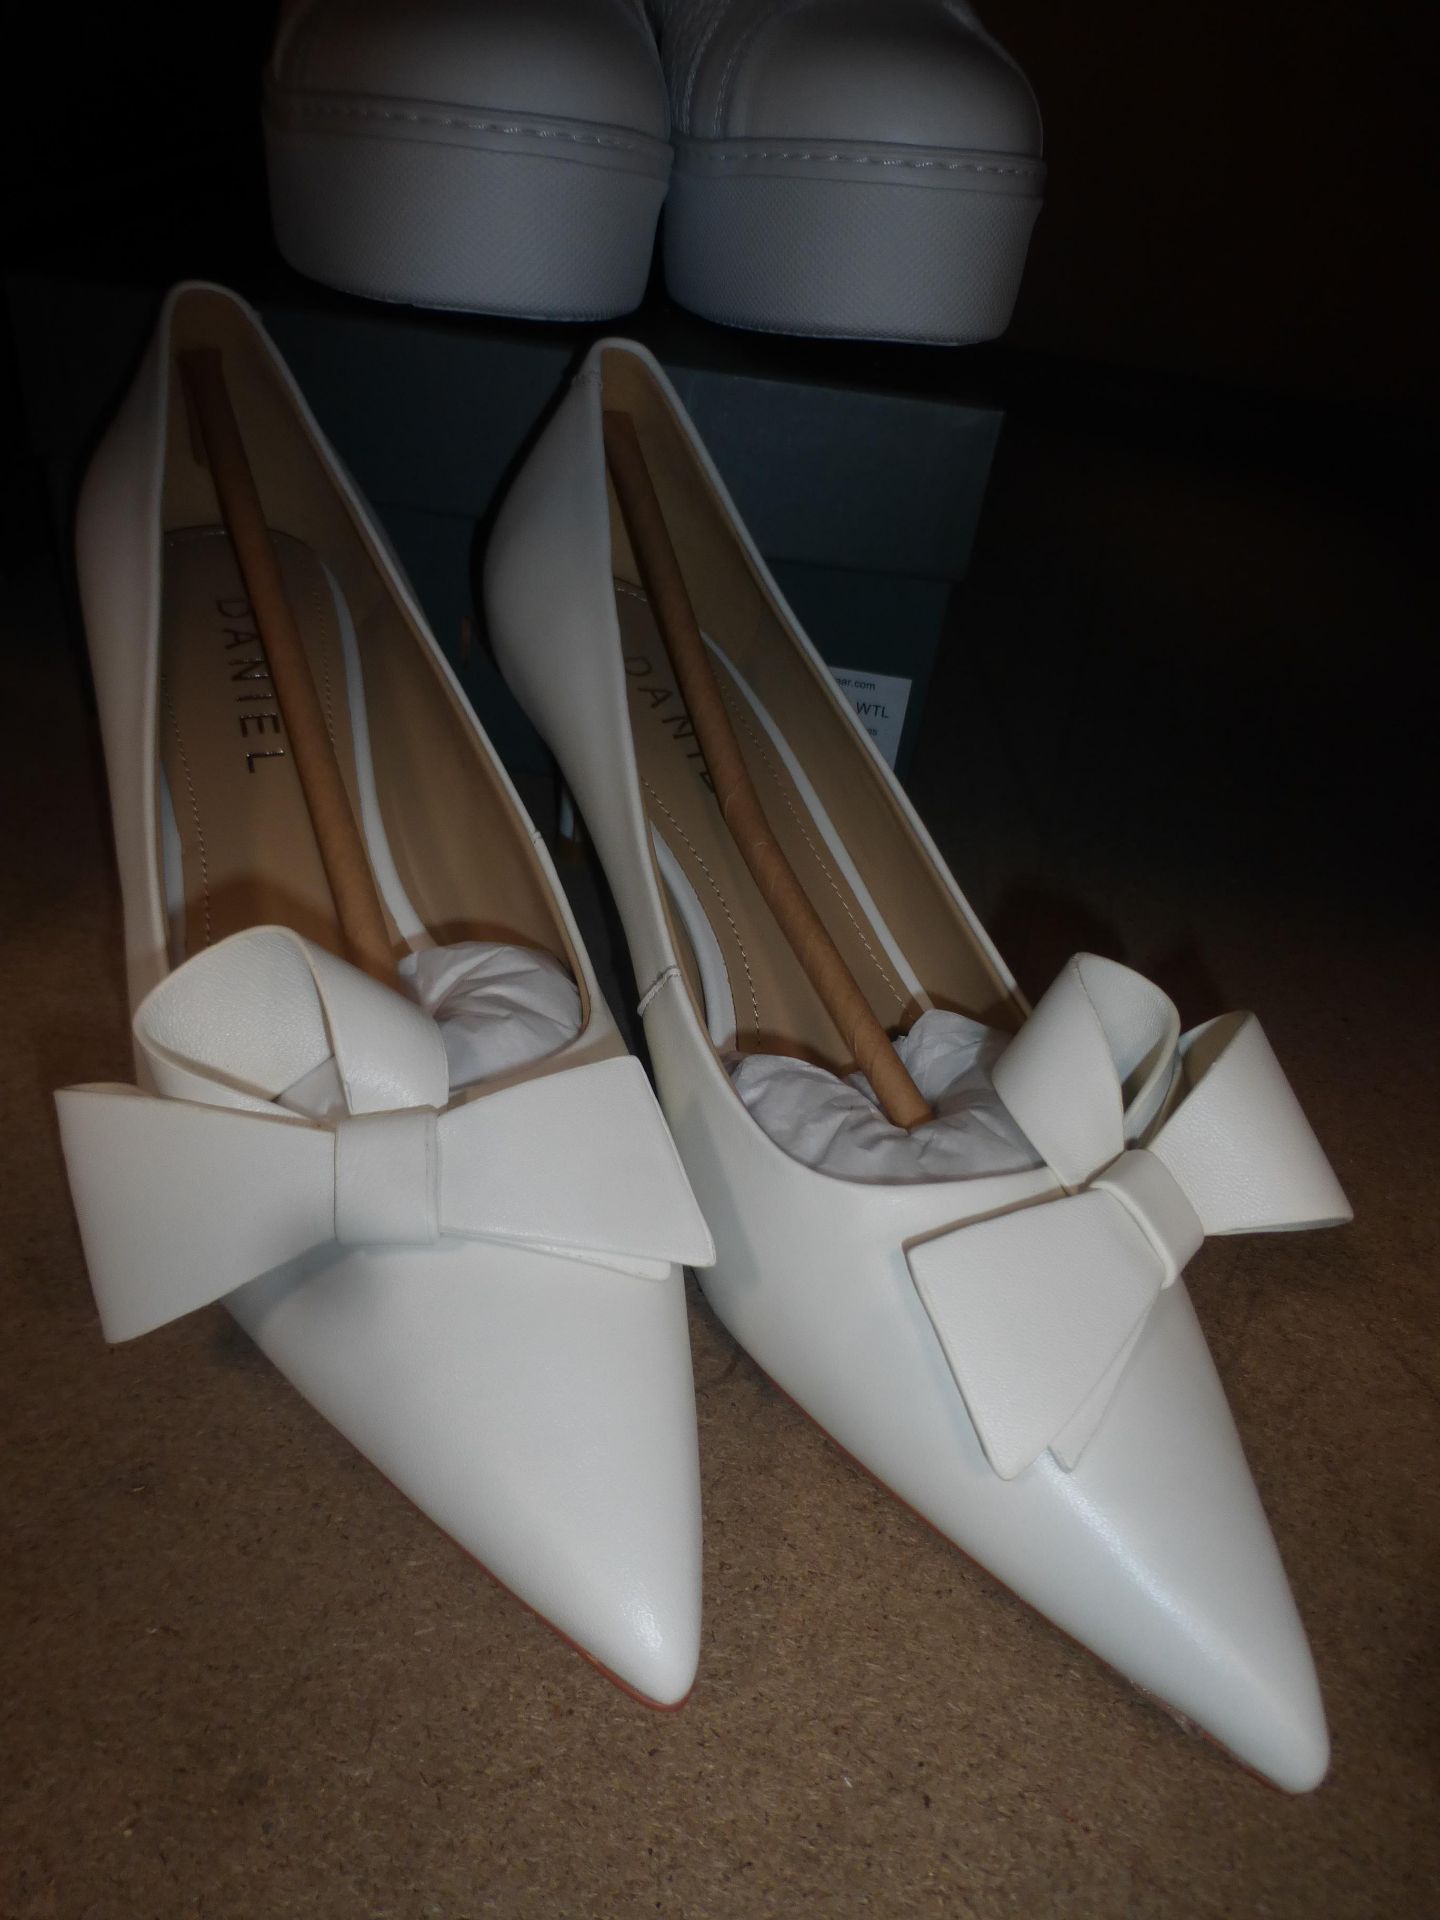 1 x pair of Daniels Trainers, size 5 and 1 x pair of Stormi heels, size 5 - new in box (E8B) - Image 3 of 3